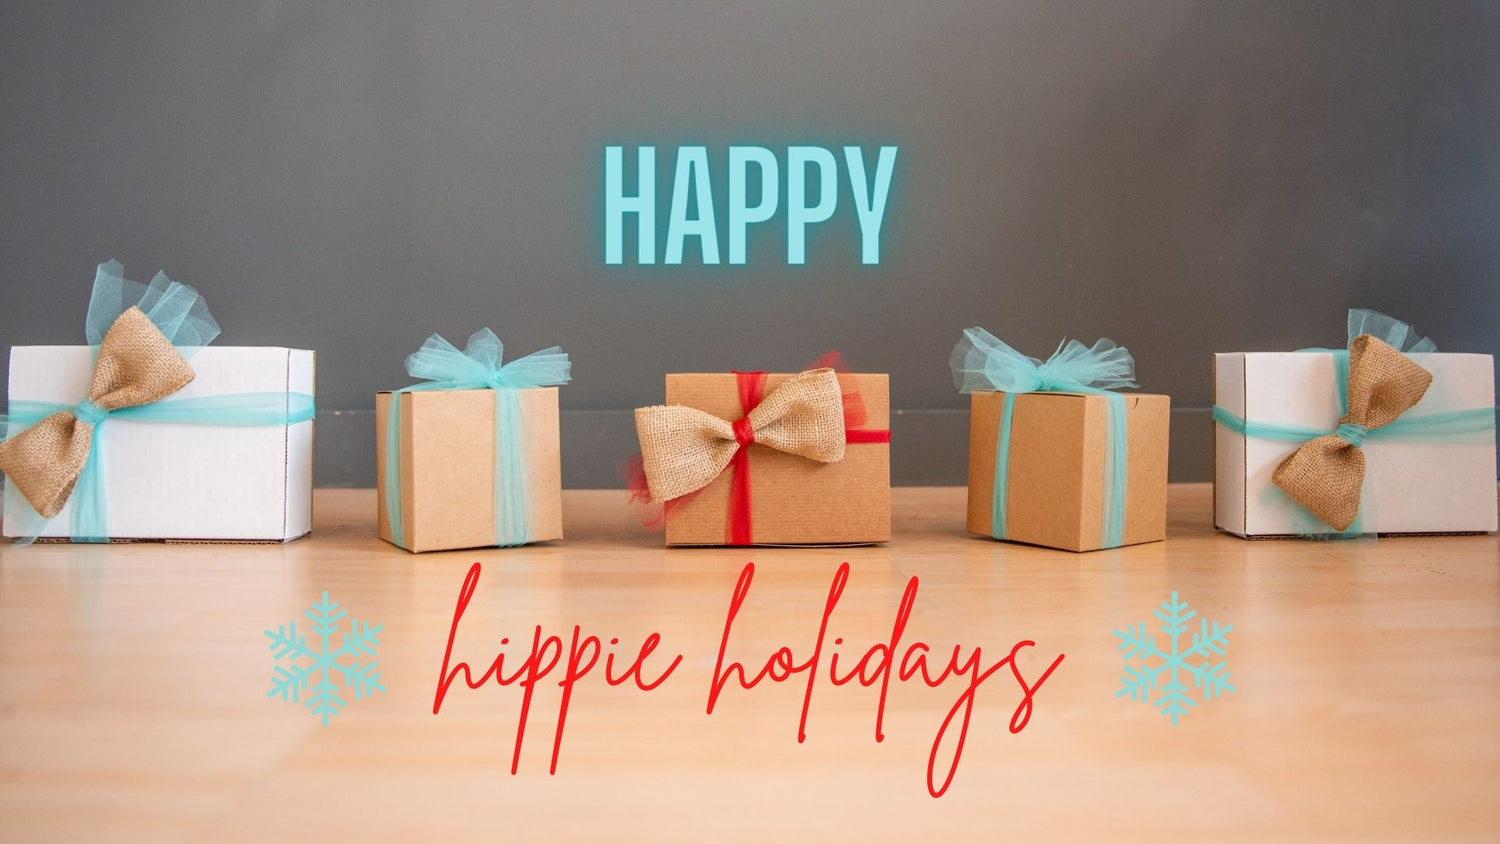 Happy Hippie Holidays with Gift Boxes - Hippie Skin Natural Skincare Ogden Utah